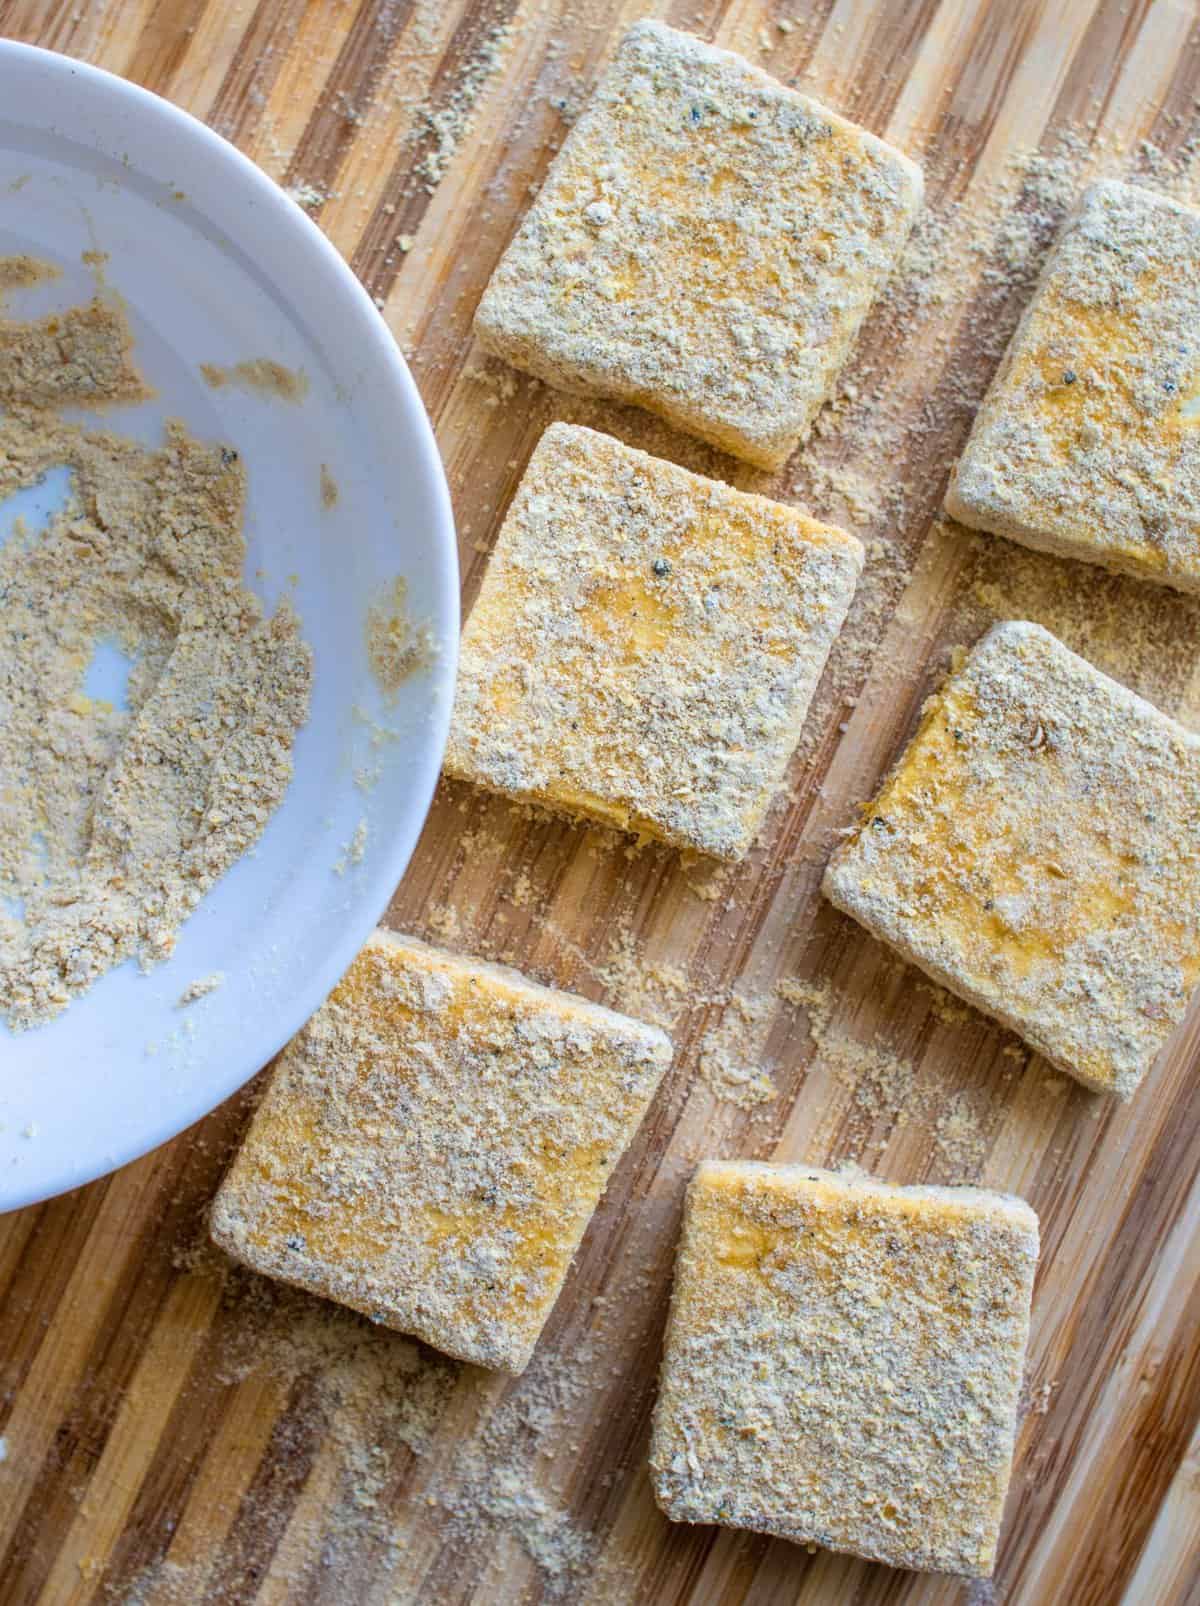 square slices of tofu covered in eggy seasoning, ready to be cooked